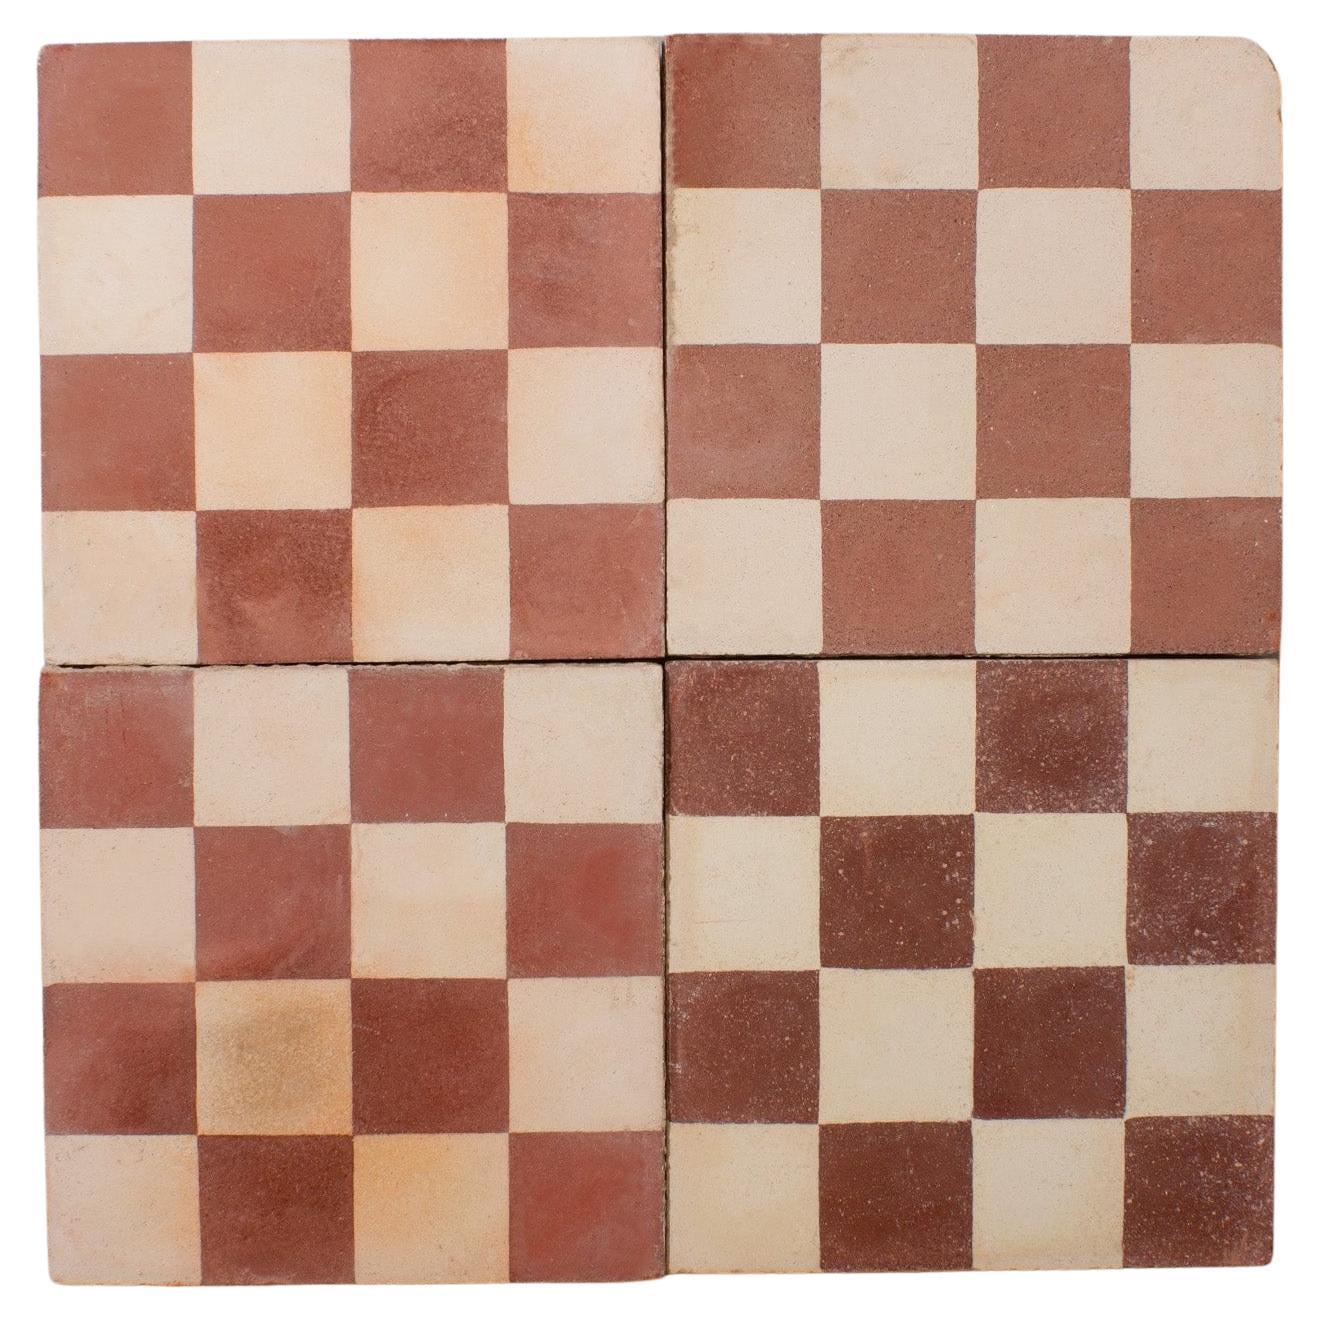 Bert & May - Chequerboard Reclaimed Tiles 8m2 Lot (86sqft) For Sale